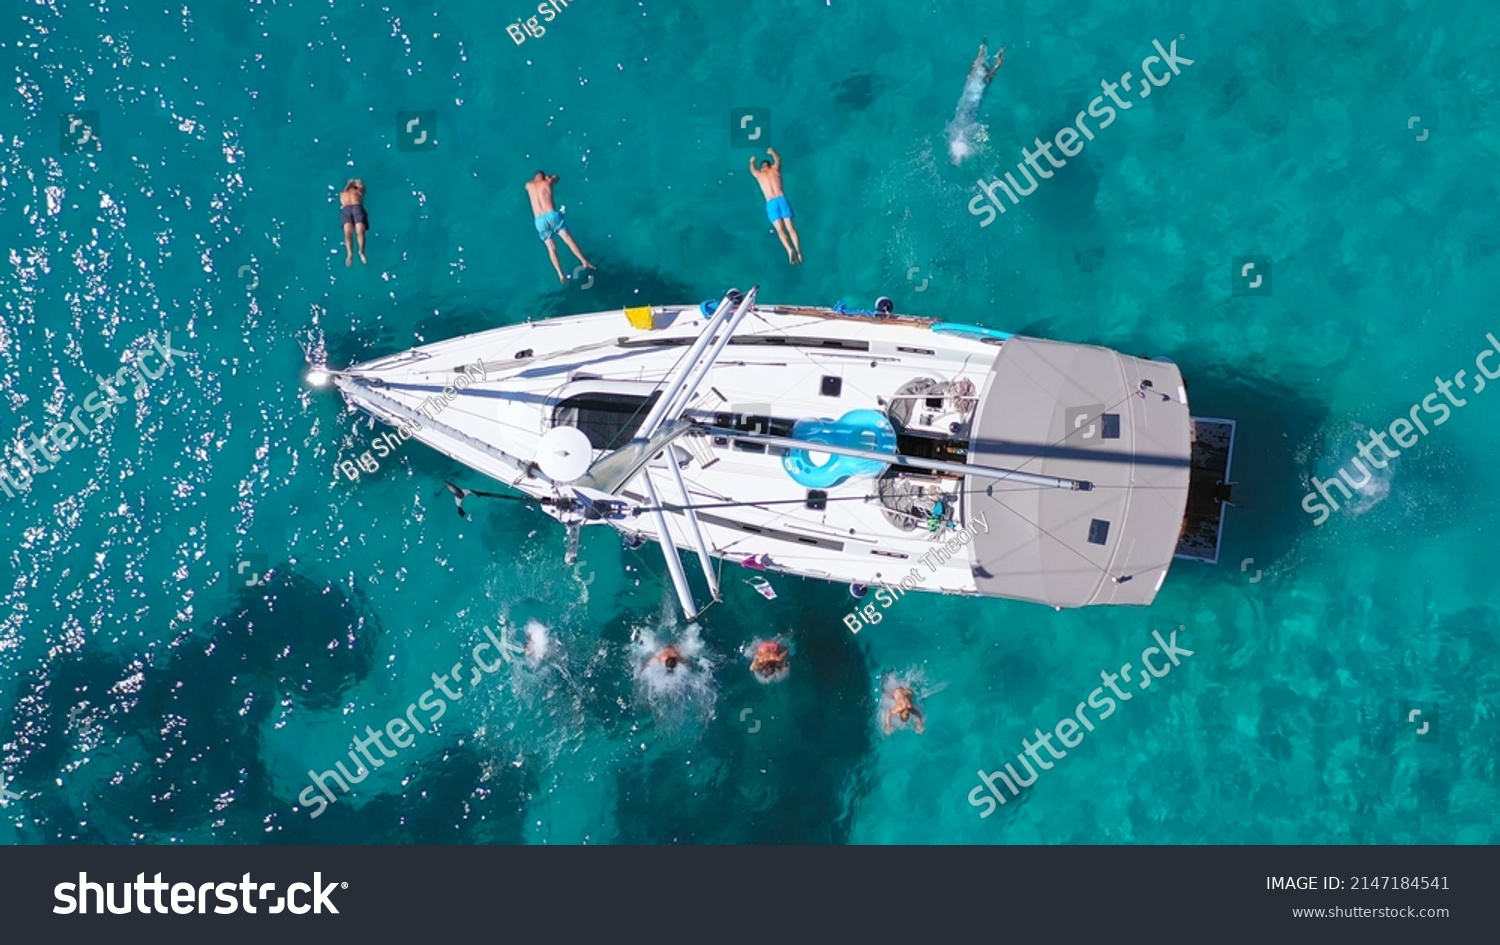 Top view of young friends jumping from sailboat. Yachting. Sail boat party day. Summer luxury boat trip #2147184541